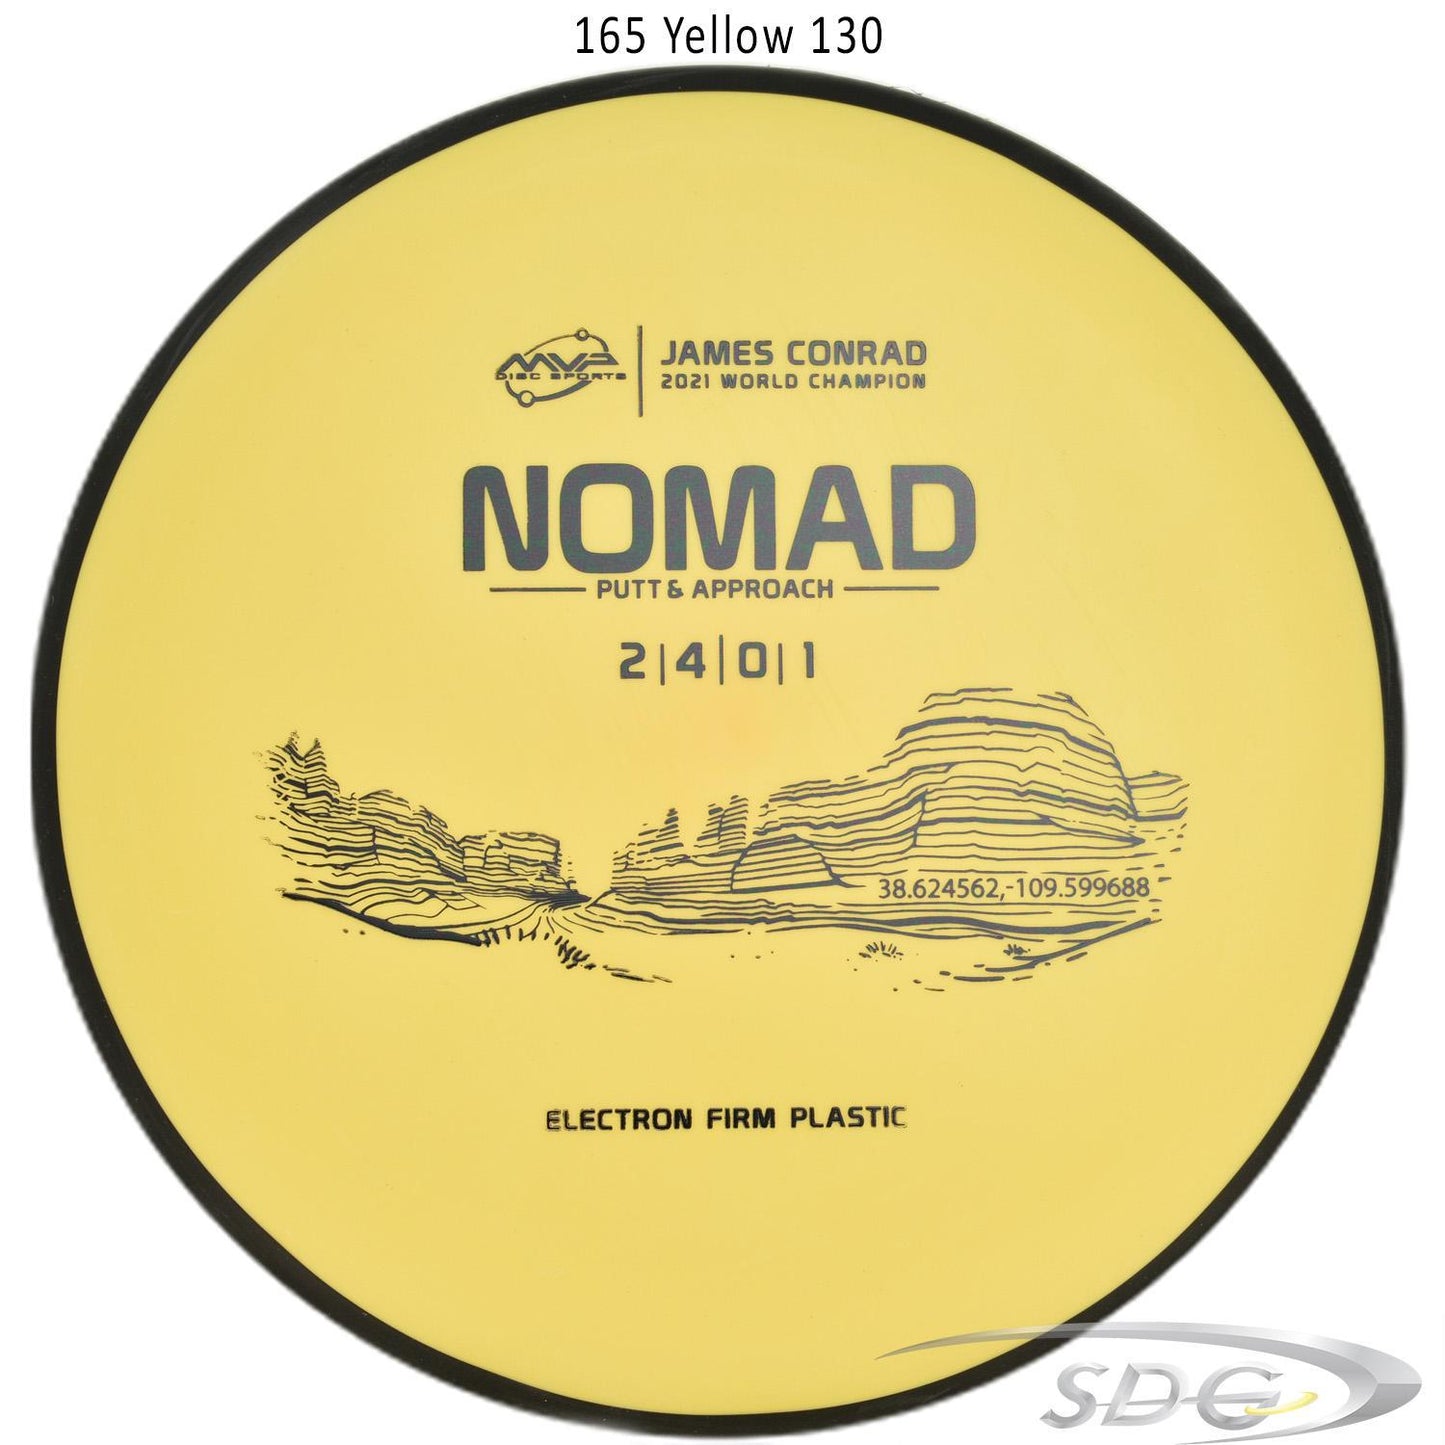 mvp-electron-nomad-firm-james-conrad-edition-disc-golf-putter 165 Yellow 130 